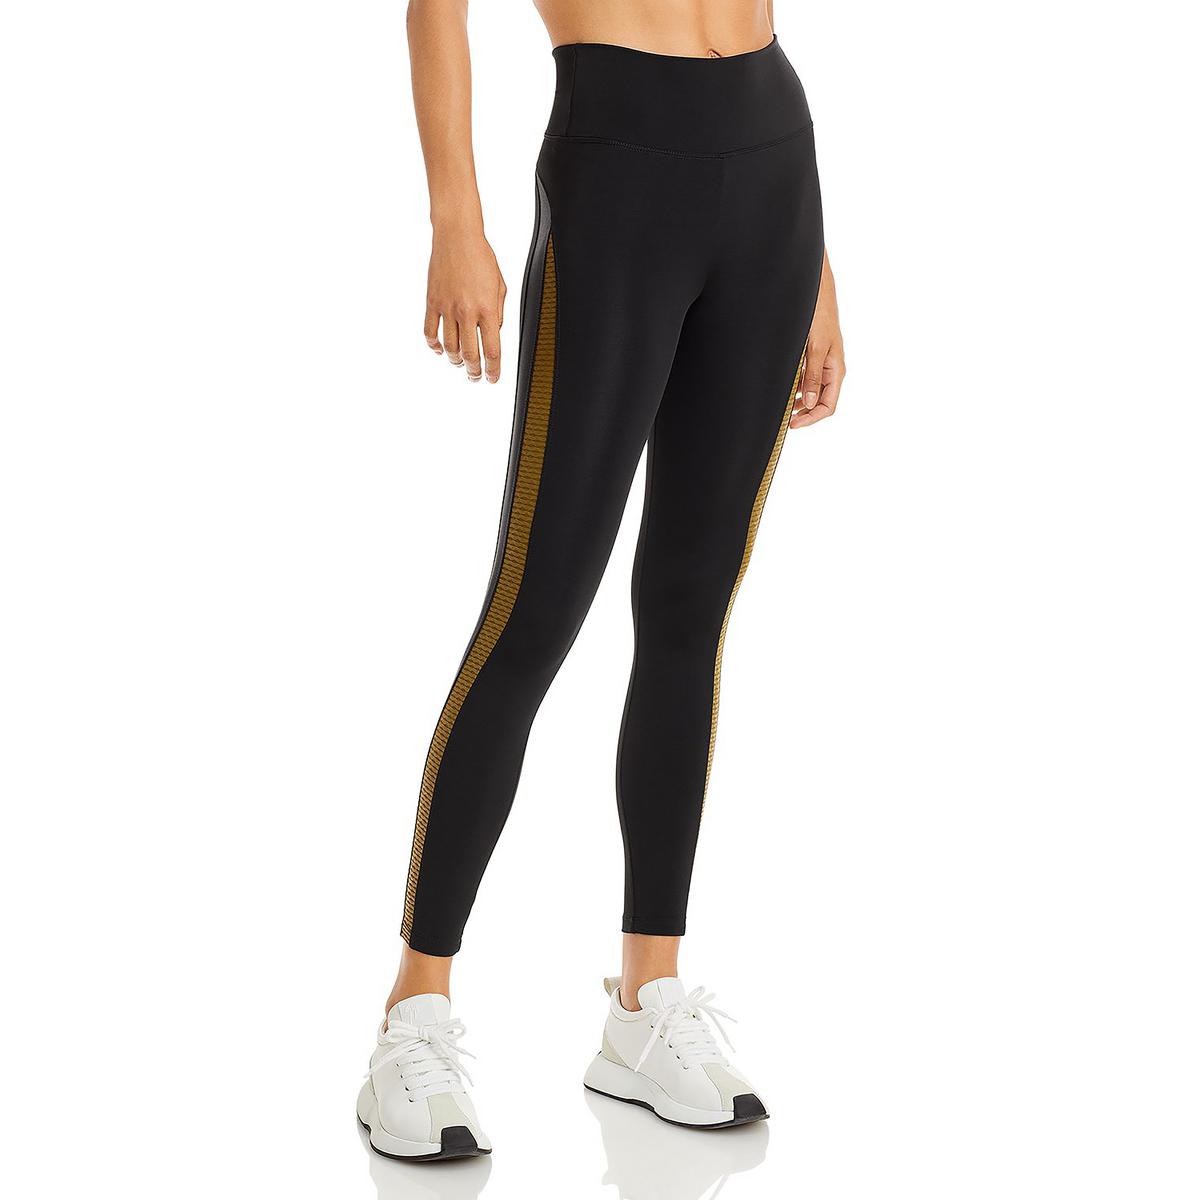 Koral Activewear Womens Knit High Rise Fitness Athletic Leggings BHFO 4207